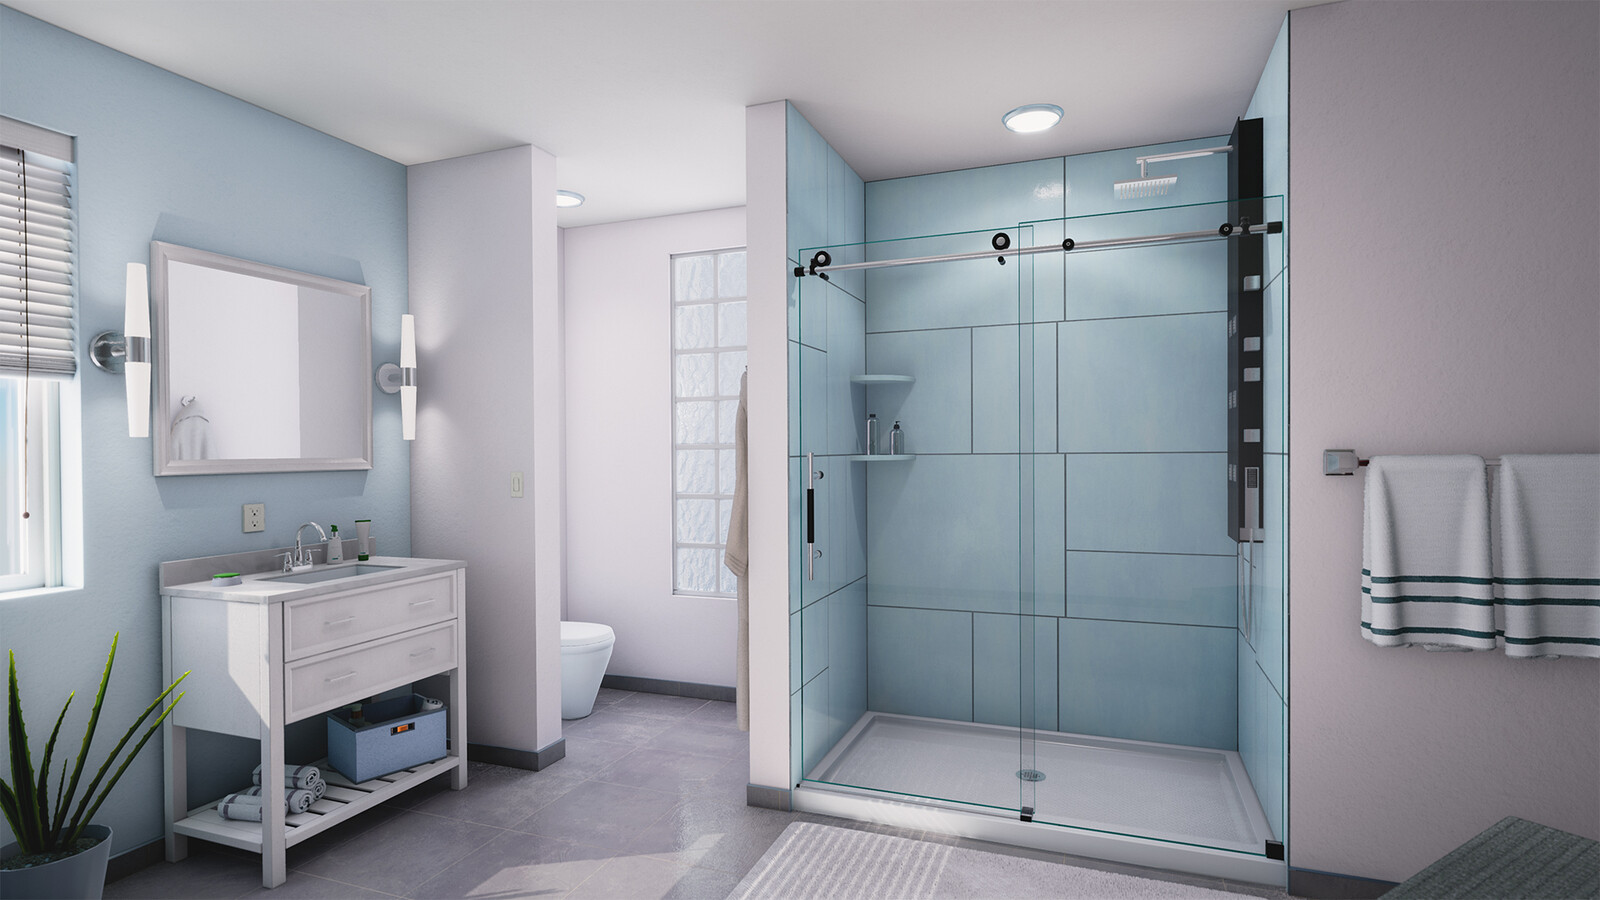 Rendered in Unreal Engine. Responsible For: room modeling and layout, lighting, texturing walls, ceiling, floor, shower and shower door. Ray Tracing in use for Reflections and Refractions.